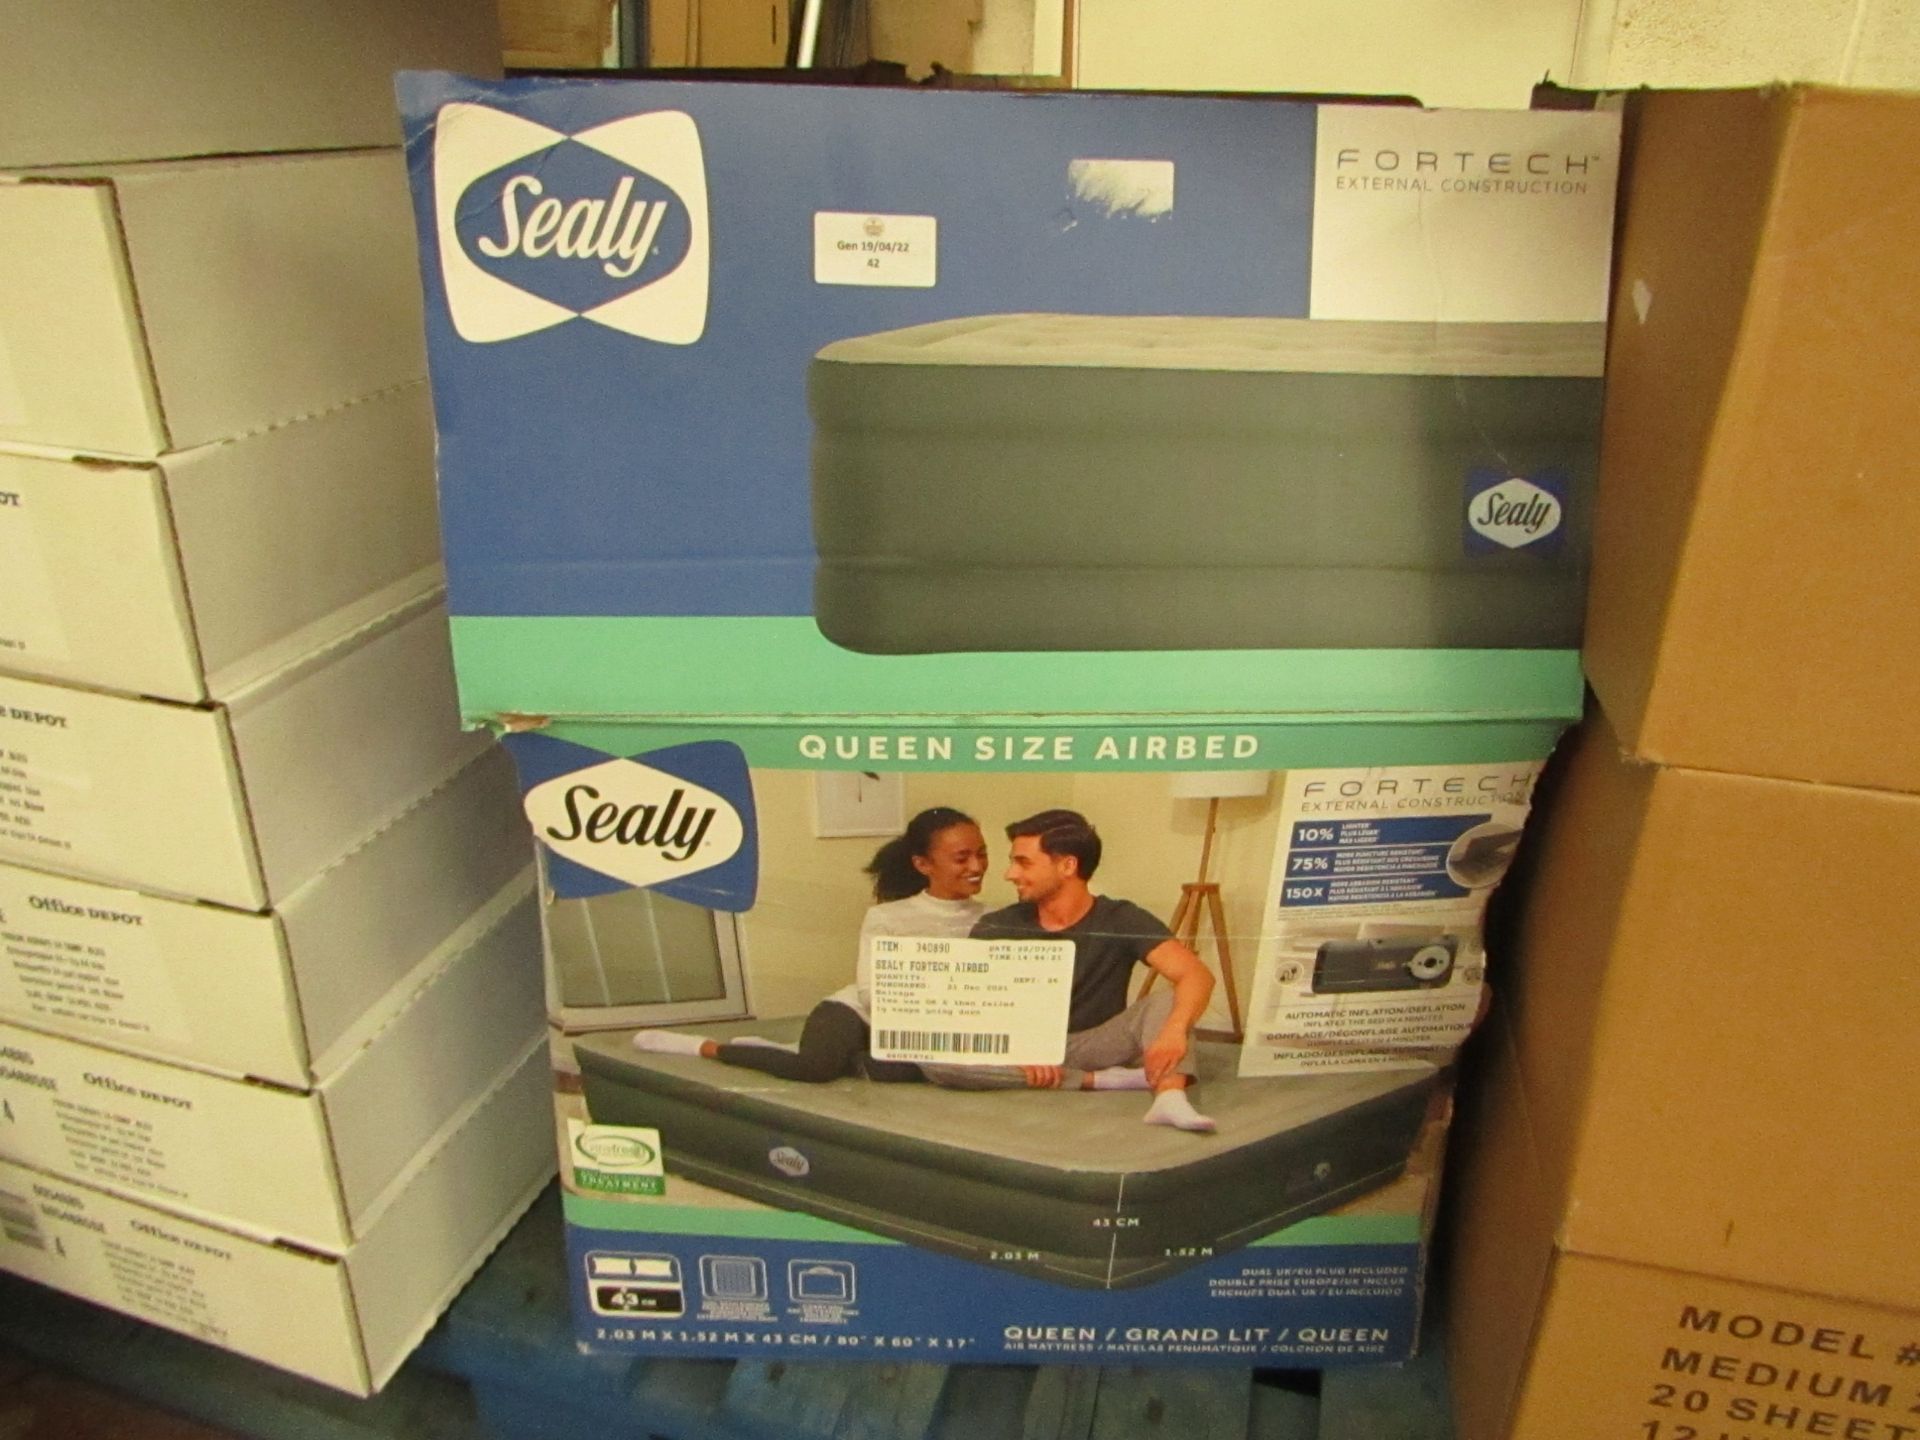 Sealy - Queen Size Fortech AirBed - Unchecked & Boxed. RRP ?69.99 @Costco.